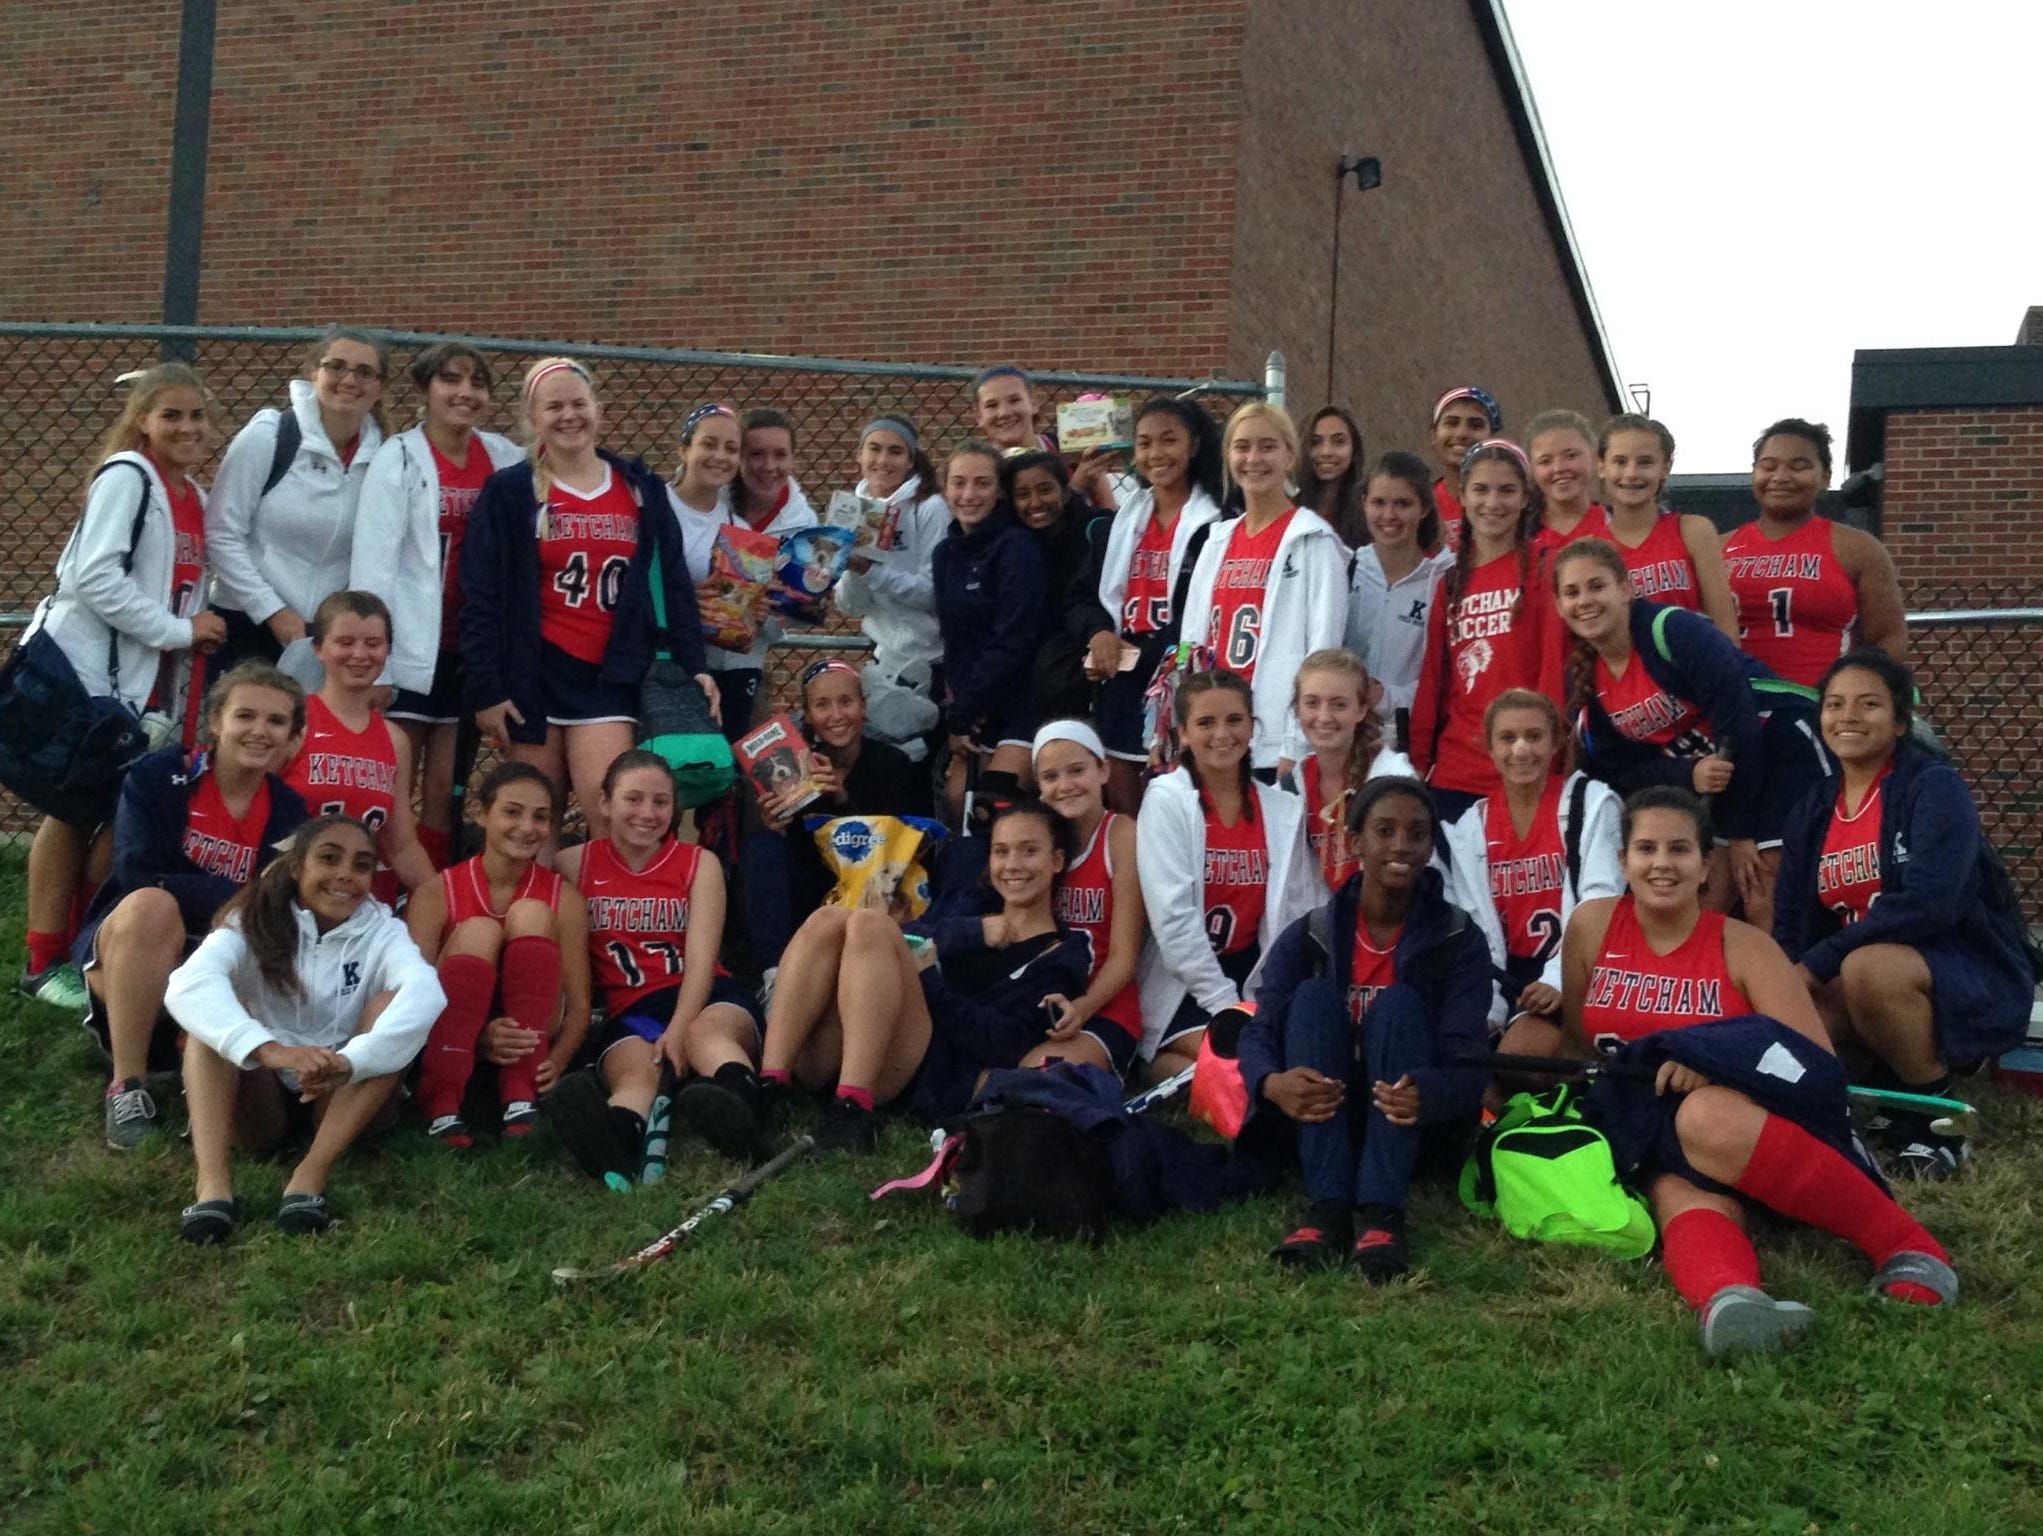 Ketcham's field hockey team took part in the Yorktown team's drive, donating to the SPCA of Westchester Friday.